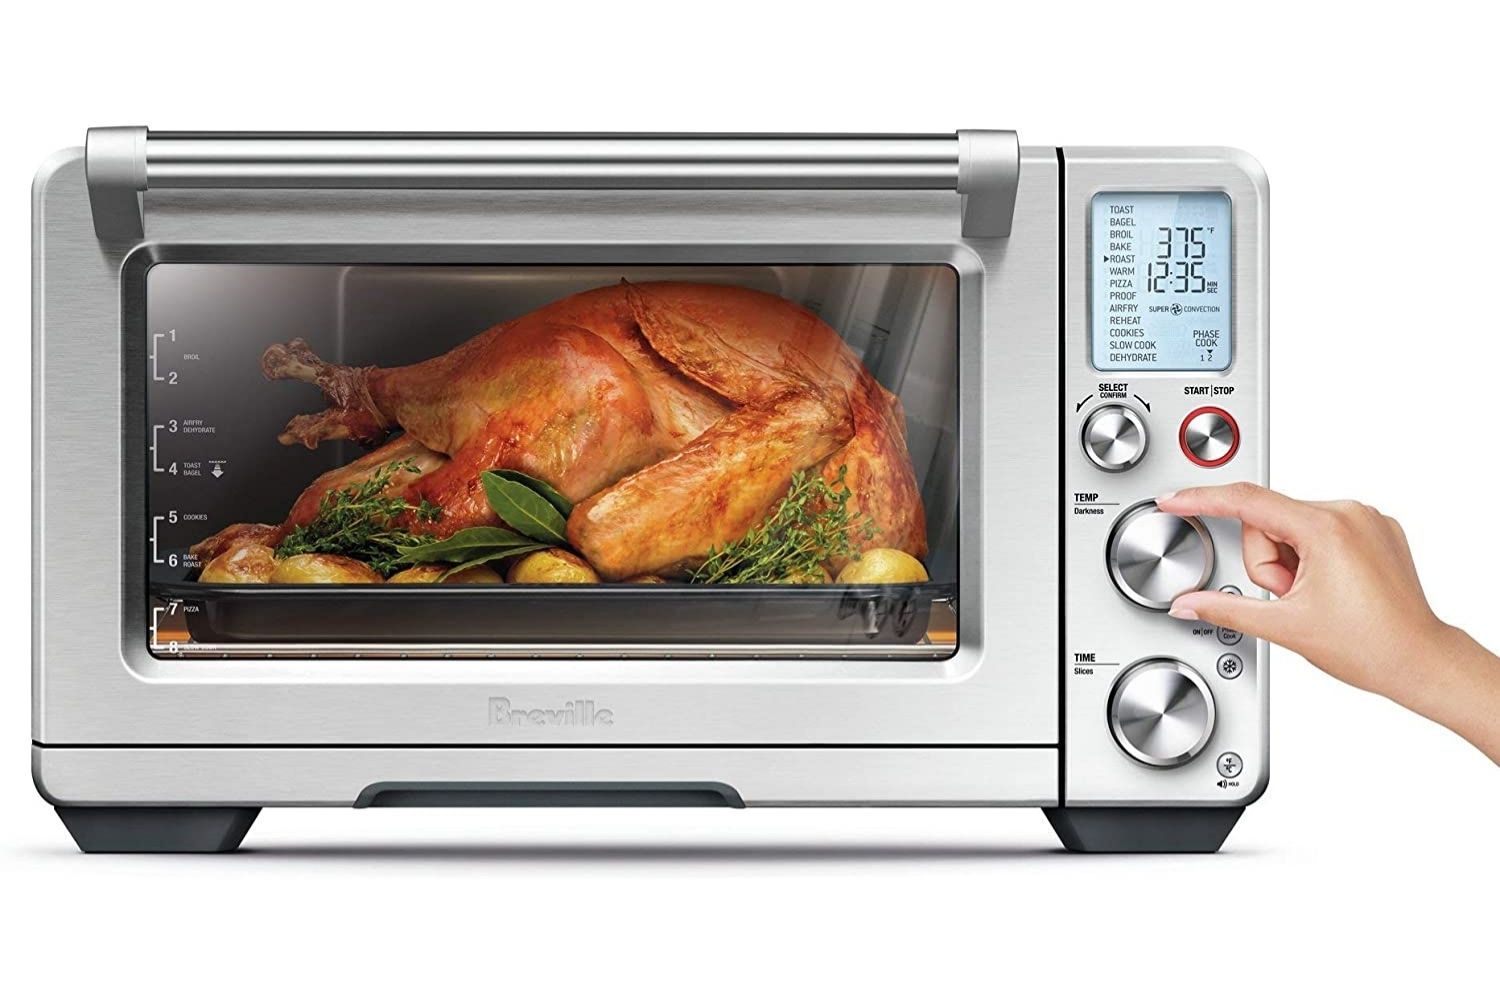 The Best Convection Oven Option